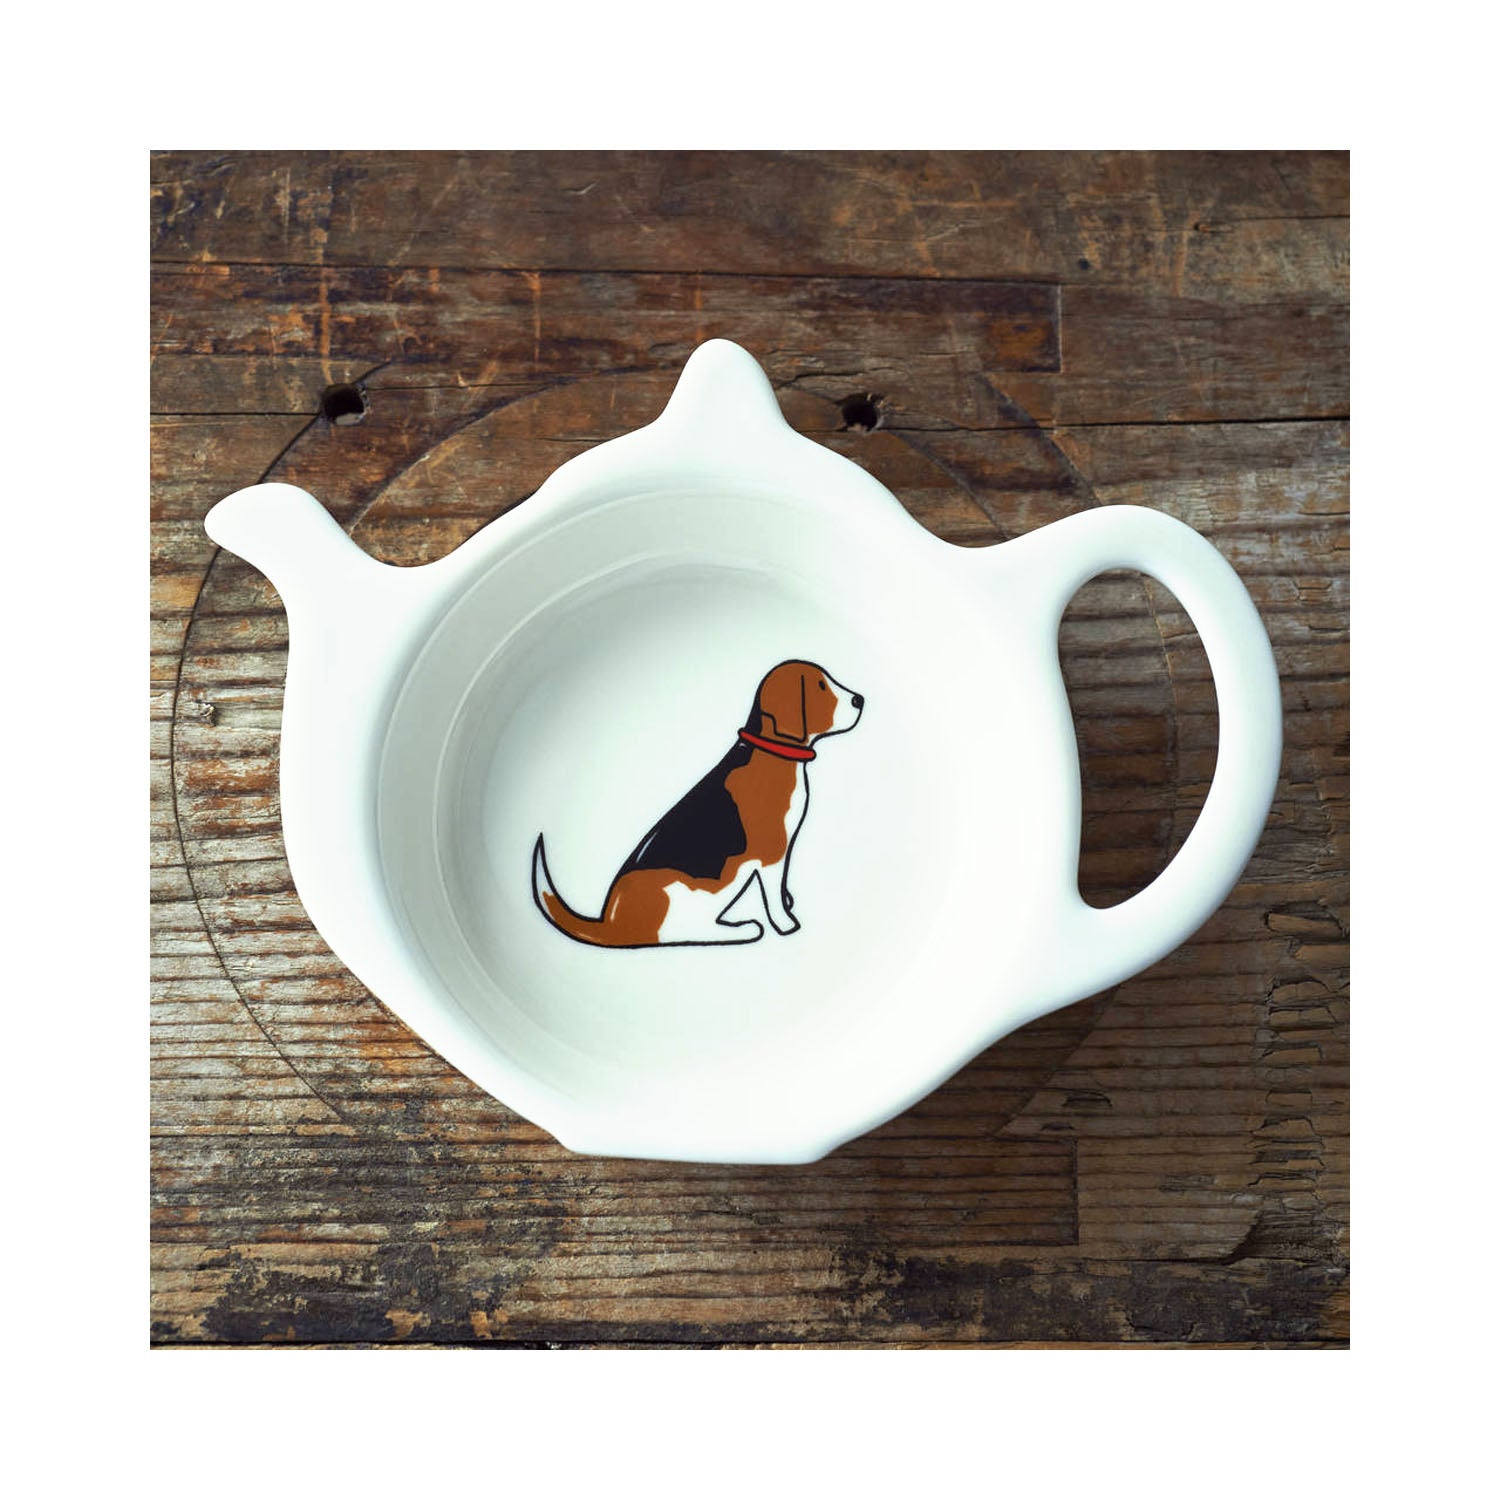 Dog Lover Gifts available at Dog Krazy Gifts - Rupert The Beagle Teabag Dish - part of the Sweet William range available from www.DogKrazyGifts.co.uk